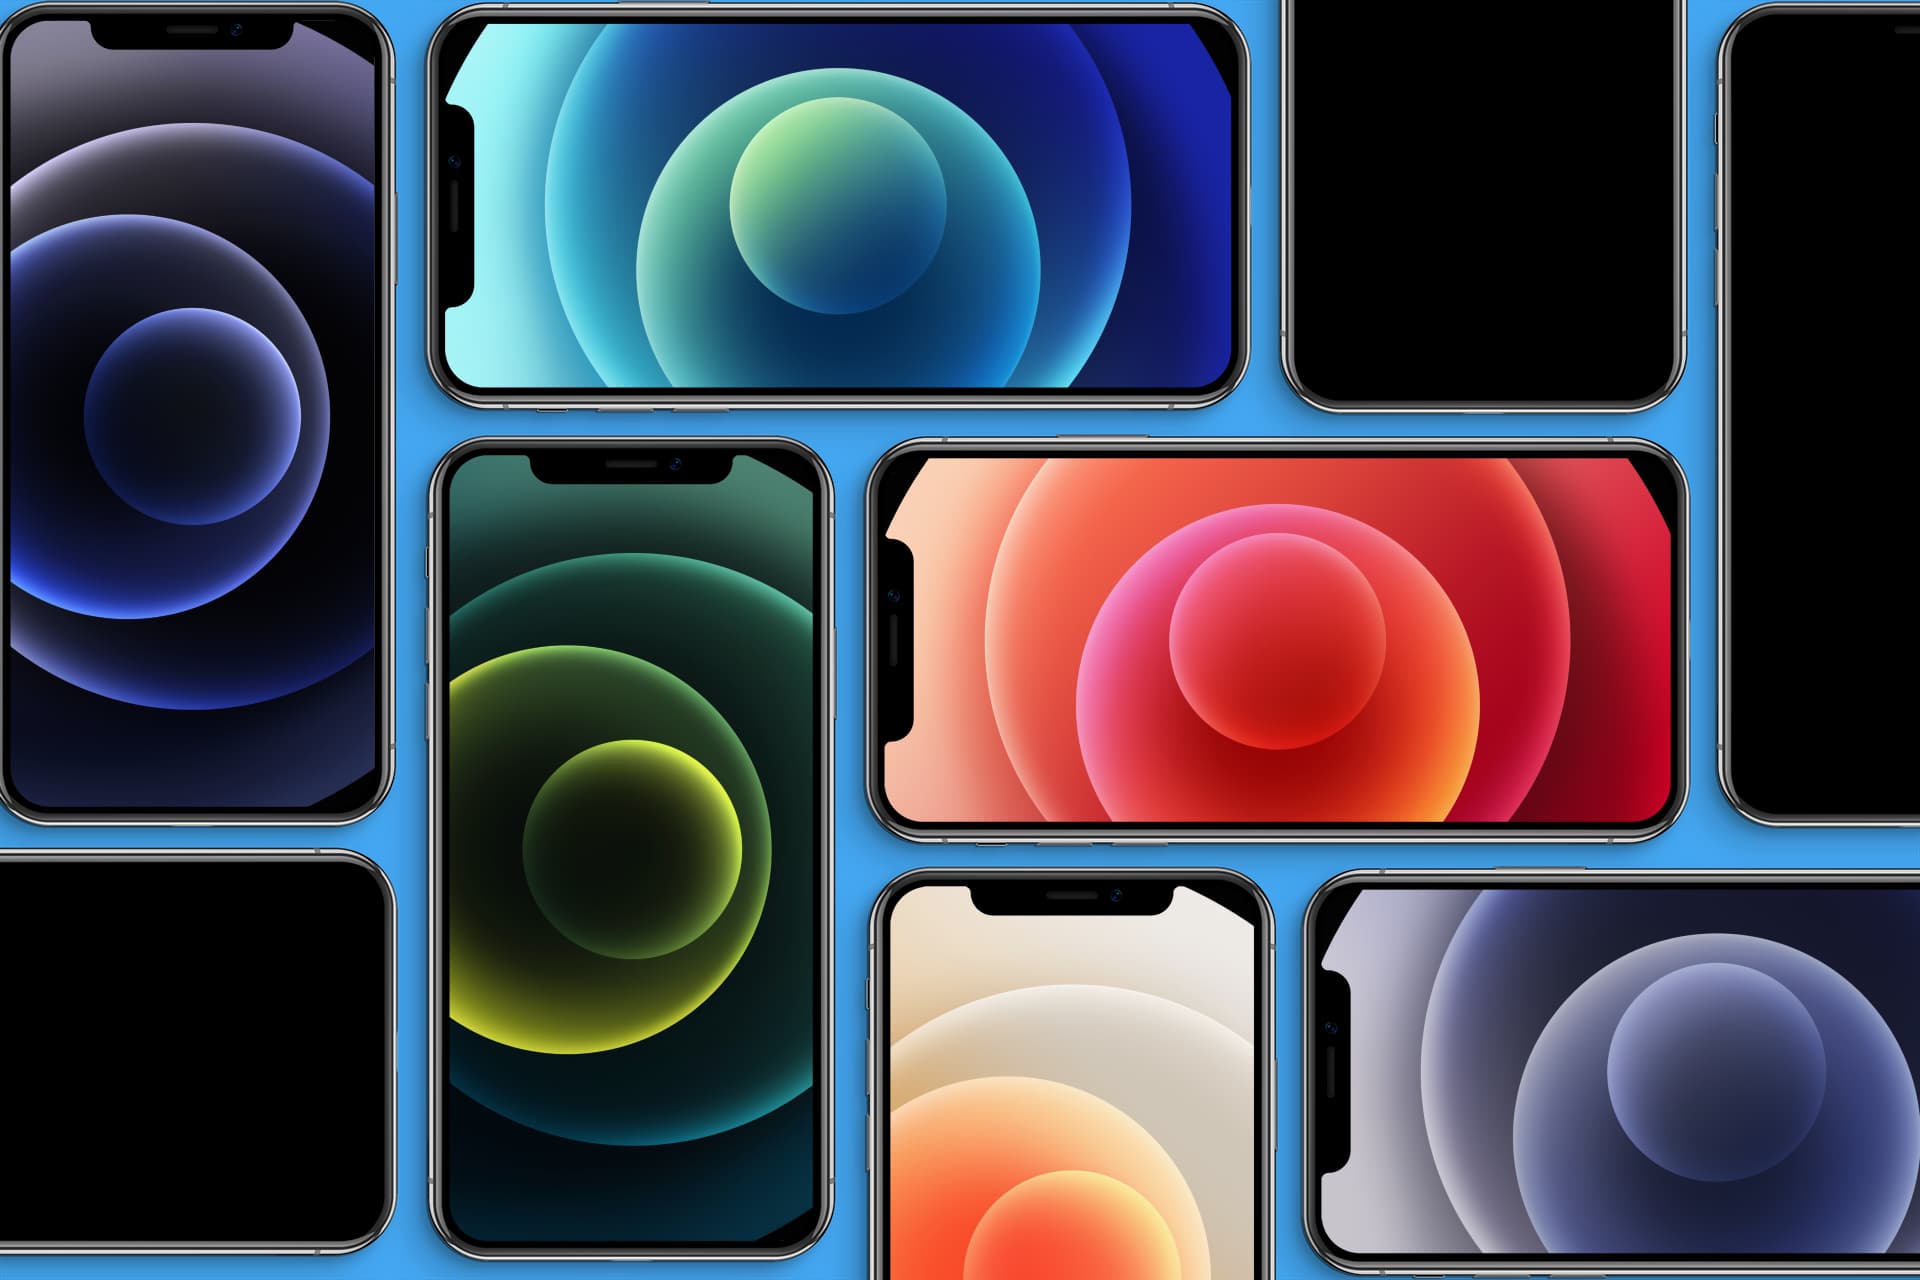 The new iPhone 12 wallpapers continue Apple's colorful design language with new options in blue, black, green, red, and white to match.